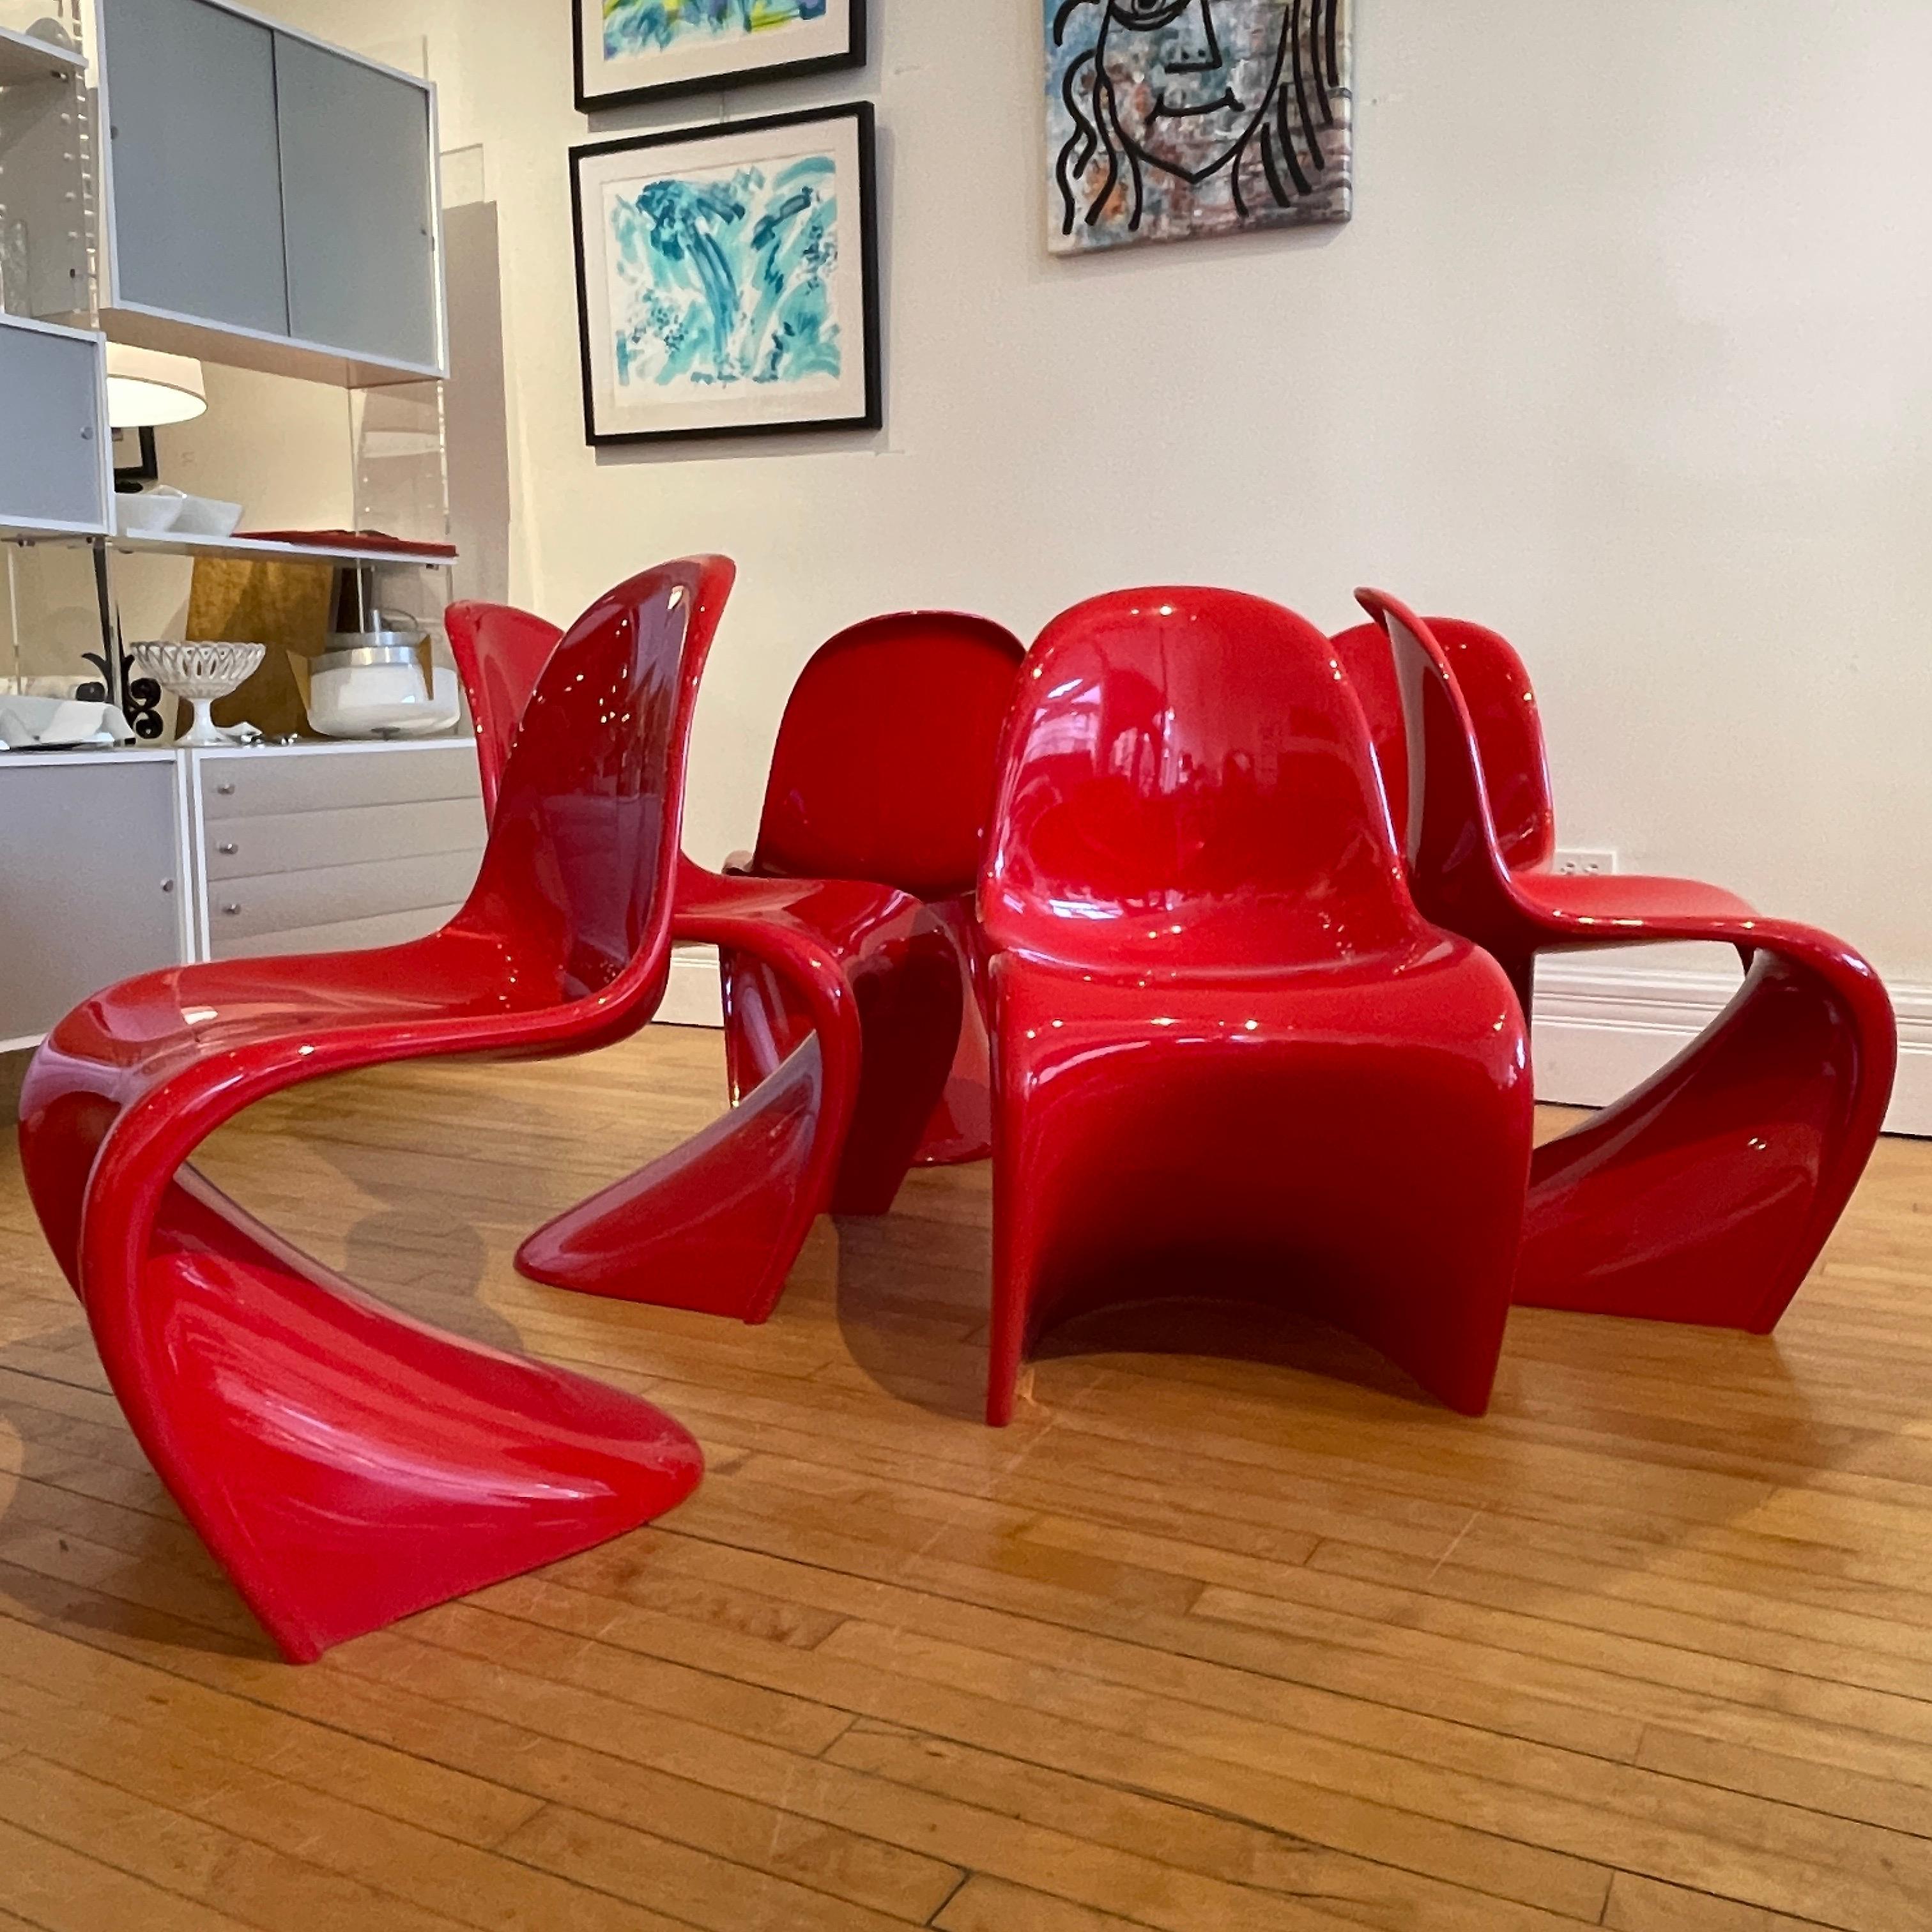 Verner Panton Classic Chairs in Red 2  Available 2